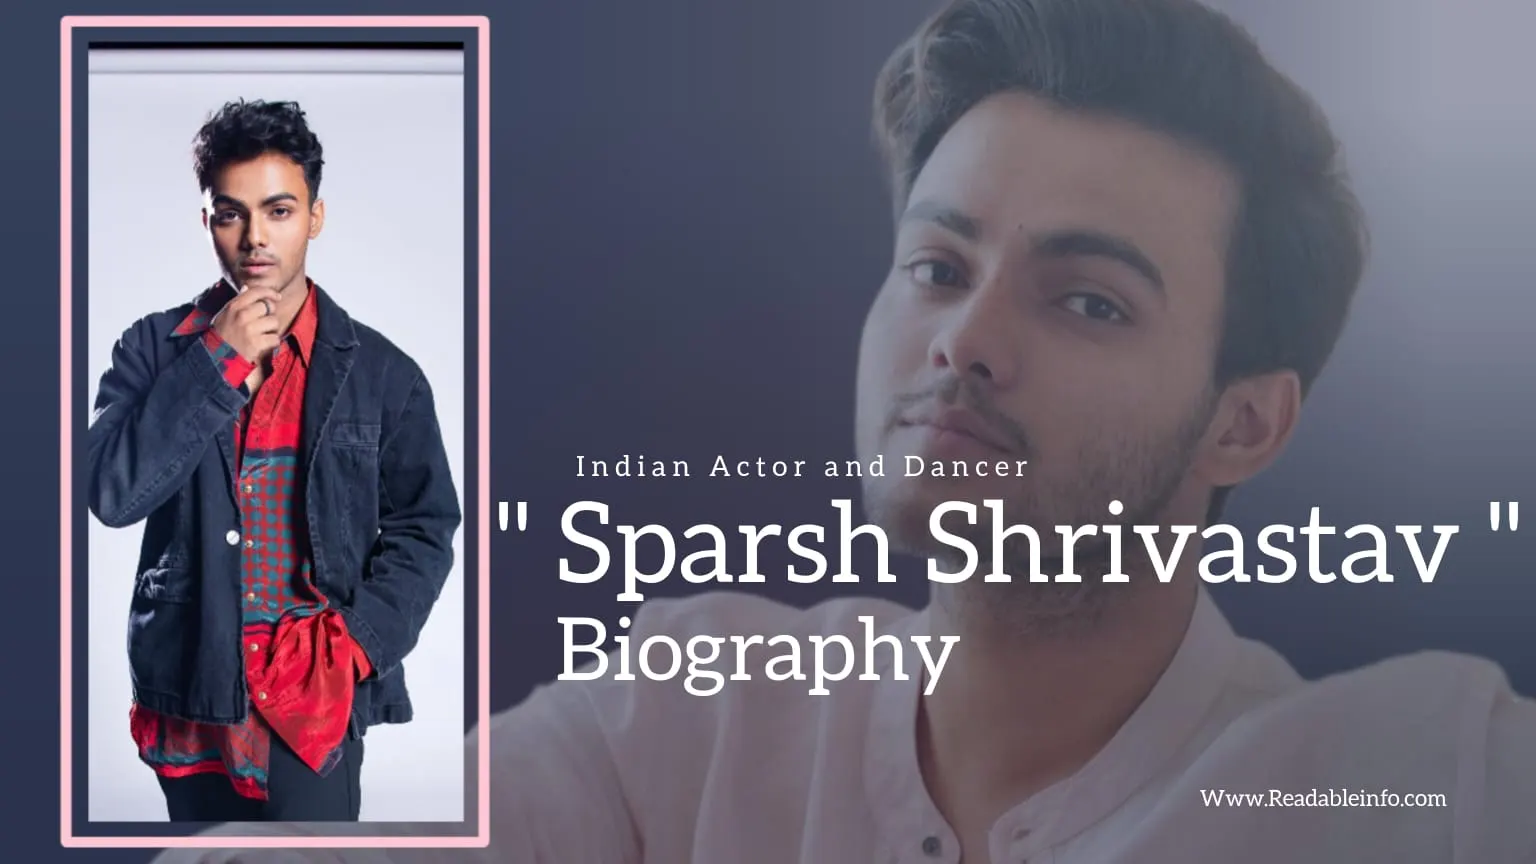 You are currently viewing Sparsh Shrivastav Biography (Indian Actor and Dancer)